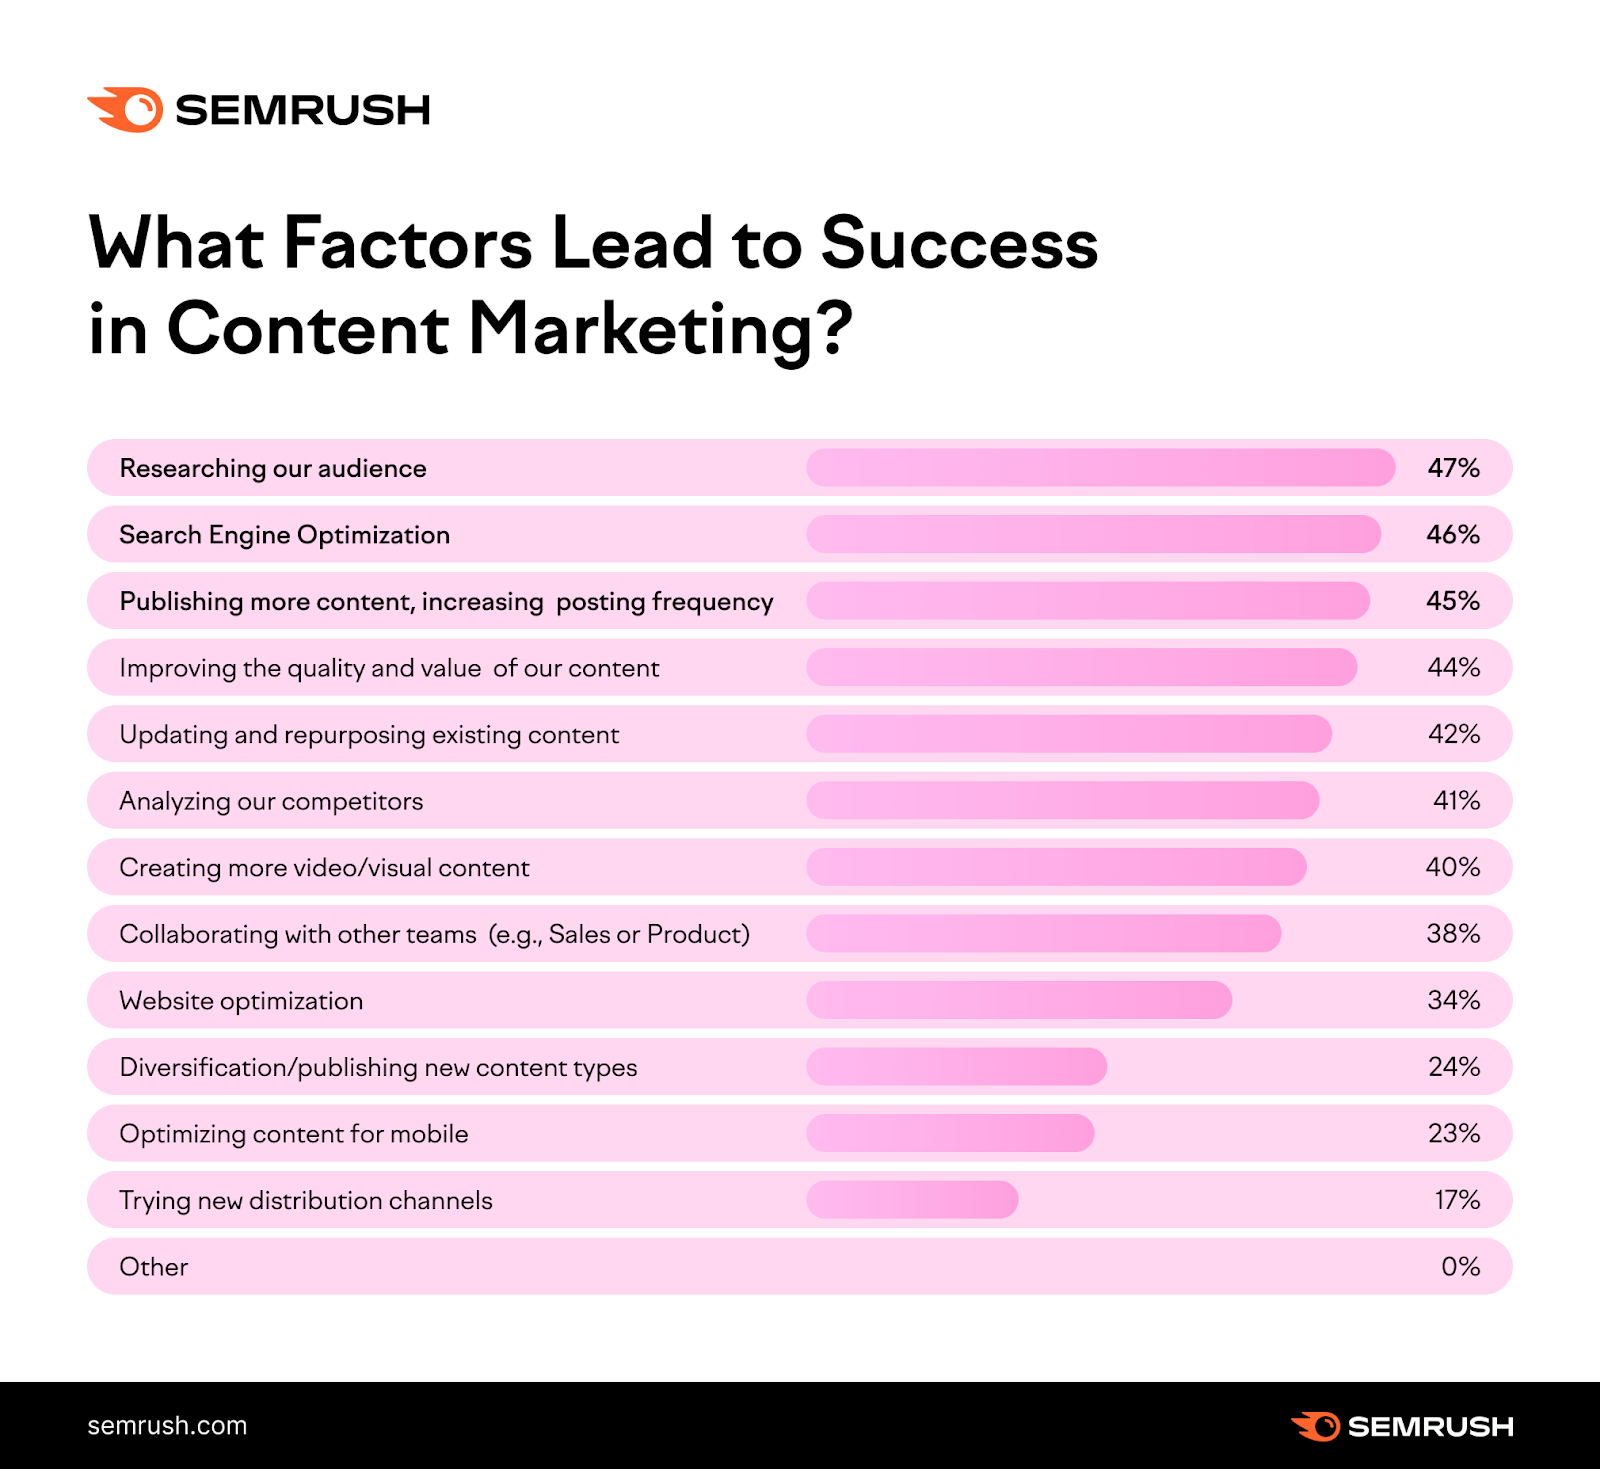 "What factors lead to success in content marketing?" answers